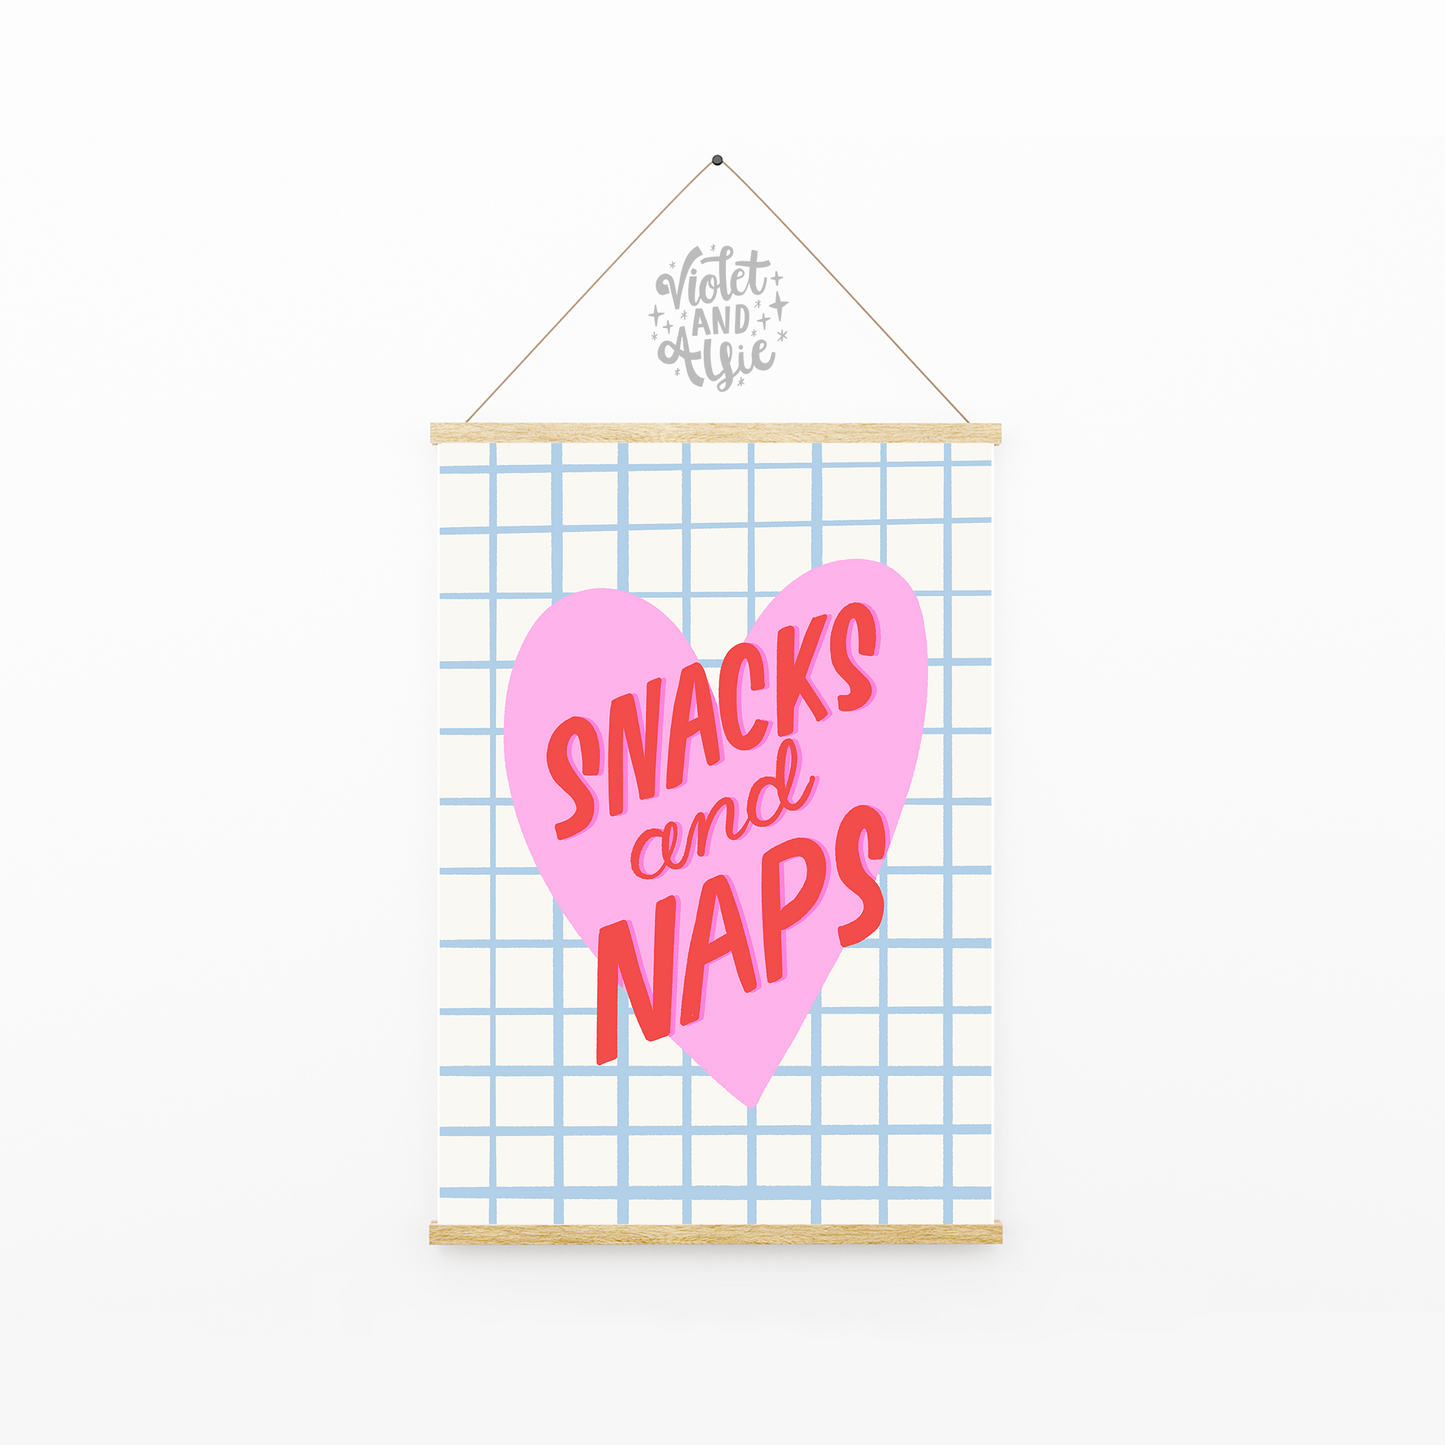 Snacks and Naps, quirky art print, relatable print, pink red and blue, typographic print, kitchen decor, gallery wall art,Funny Wall art, colourful kitchen prints, fun wall decor, dorm room decor, funky wall prints, eclectic home decor